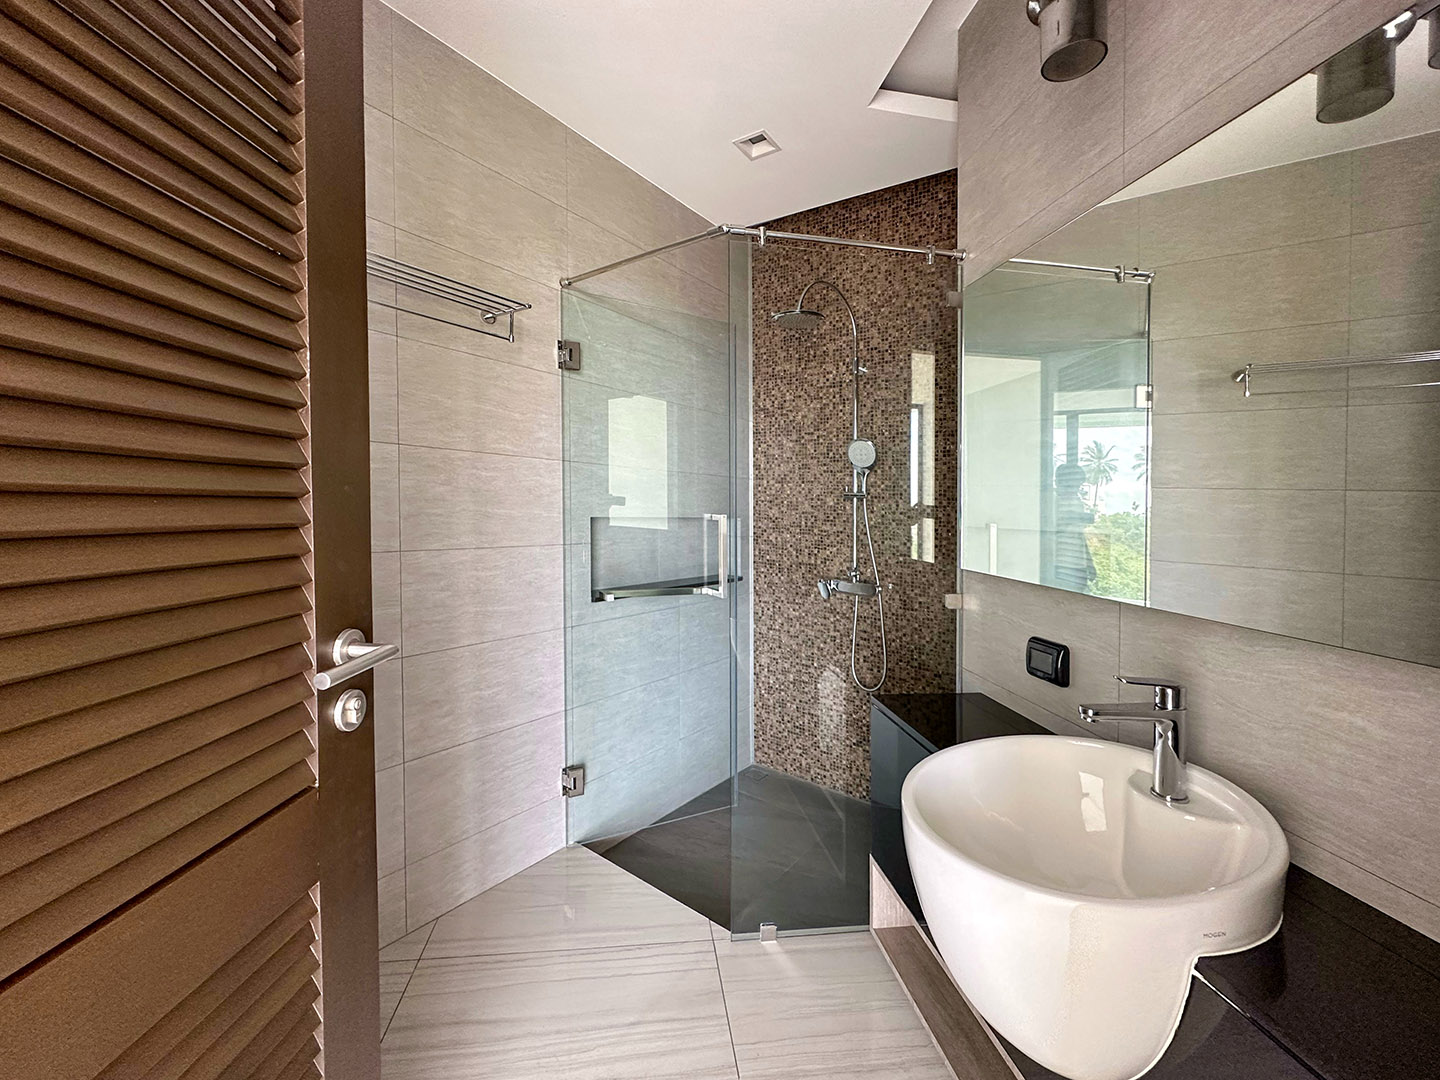 Verano Residence - Quality 4+1 Bedroom Seaview Pool Villa in Chaweng Noi for Sale: Verano Residence - Quality 4+1 Bedroom Seaview Pool Villa in Chaweng Noi for Sale